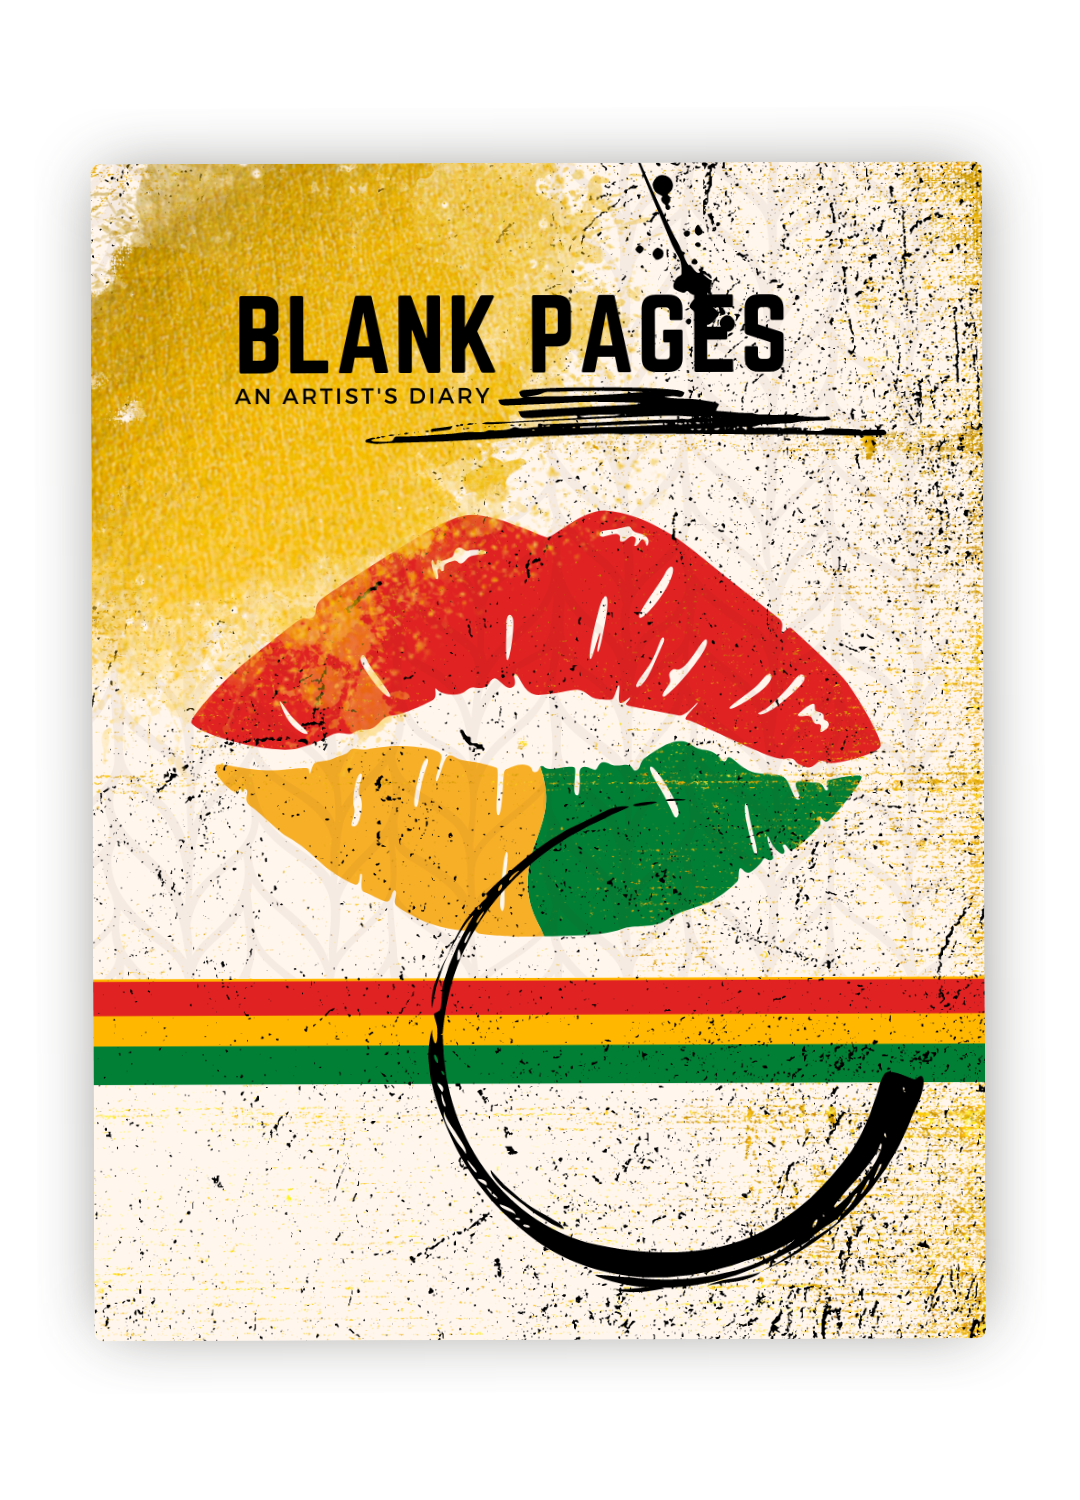 Blank Pages an Artist’s Diary